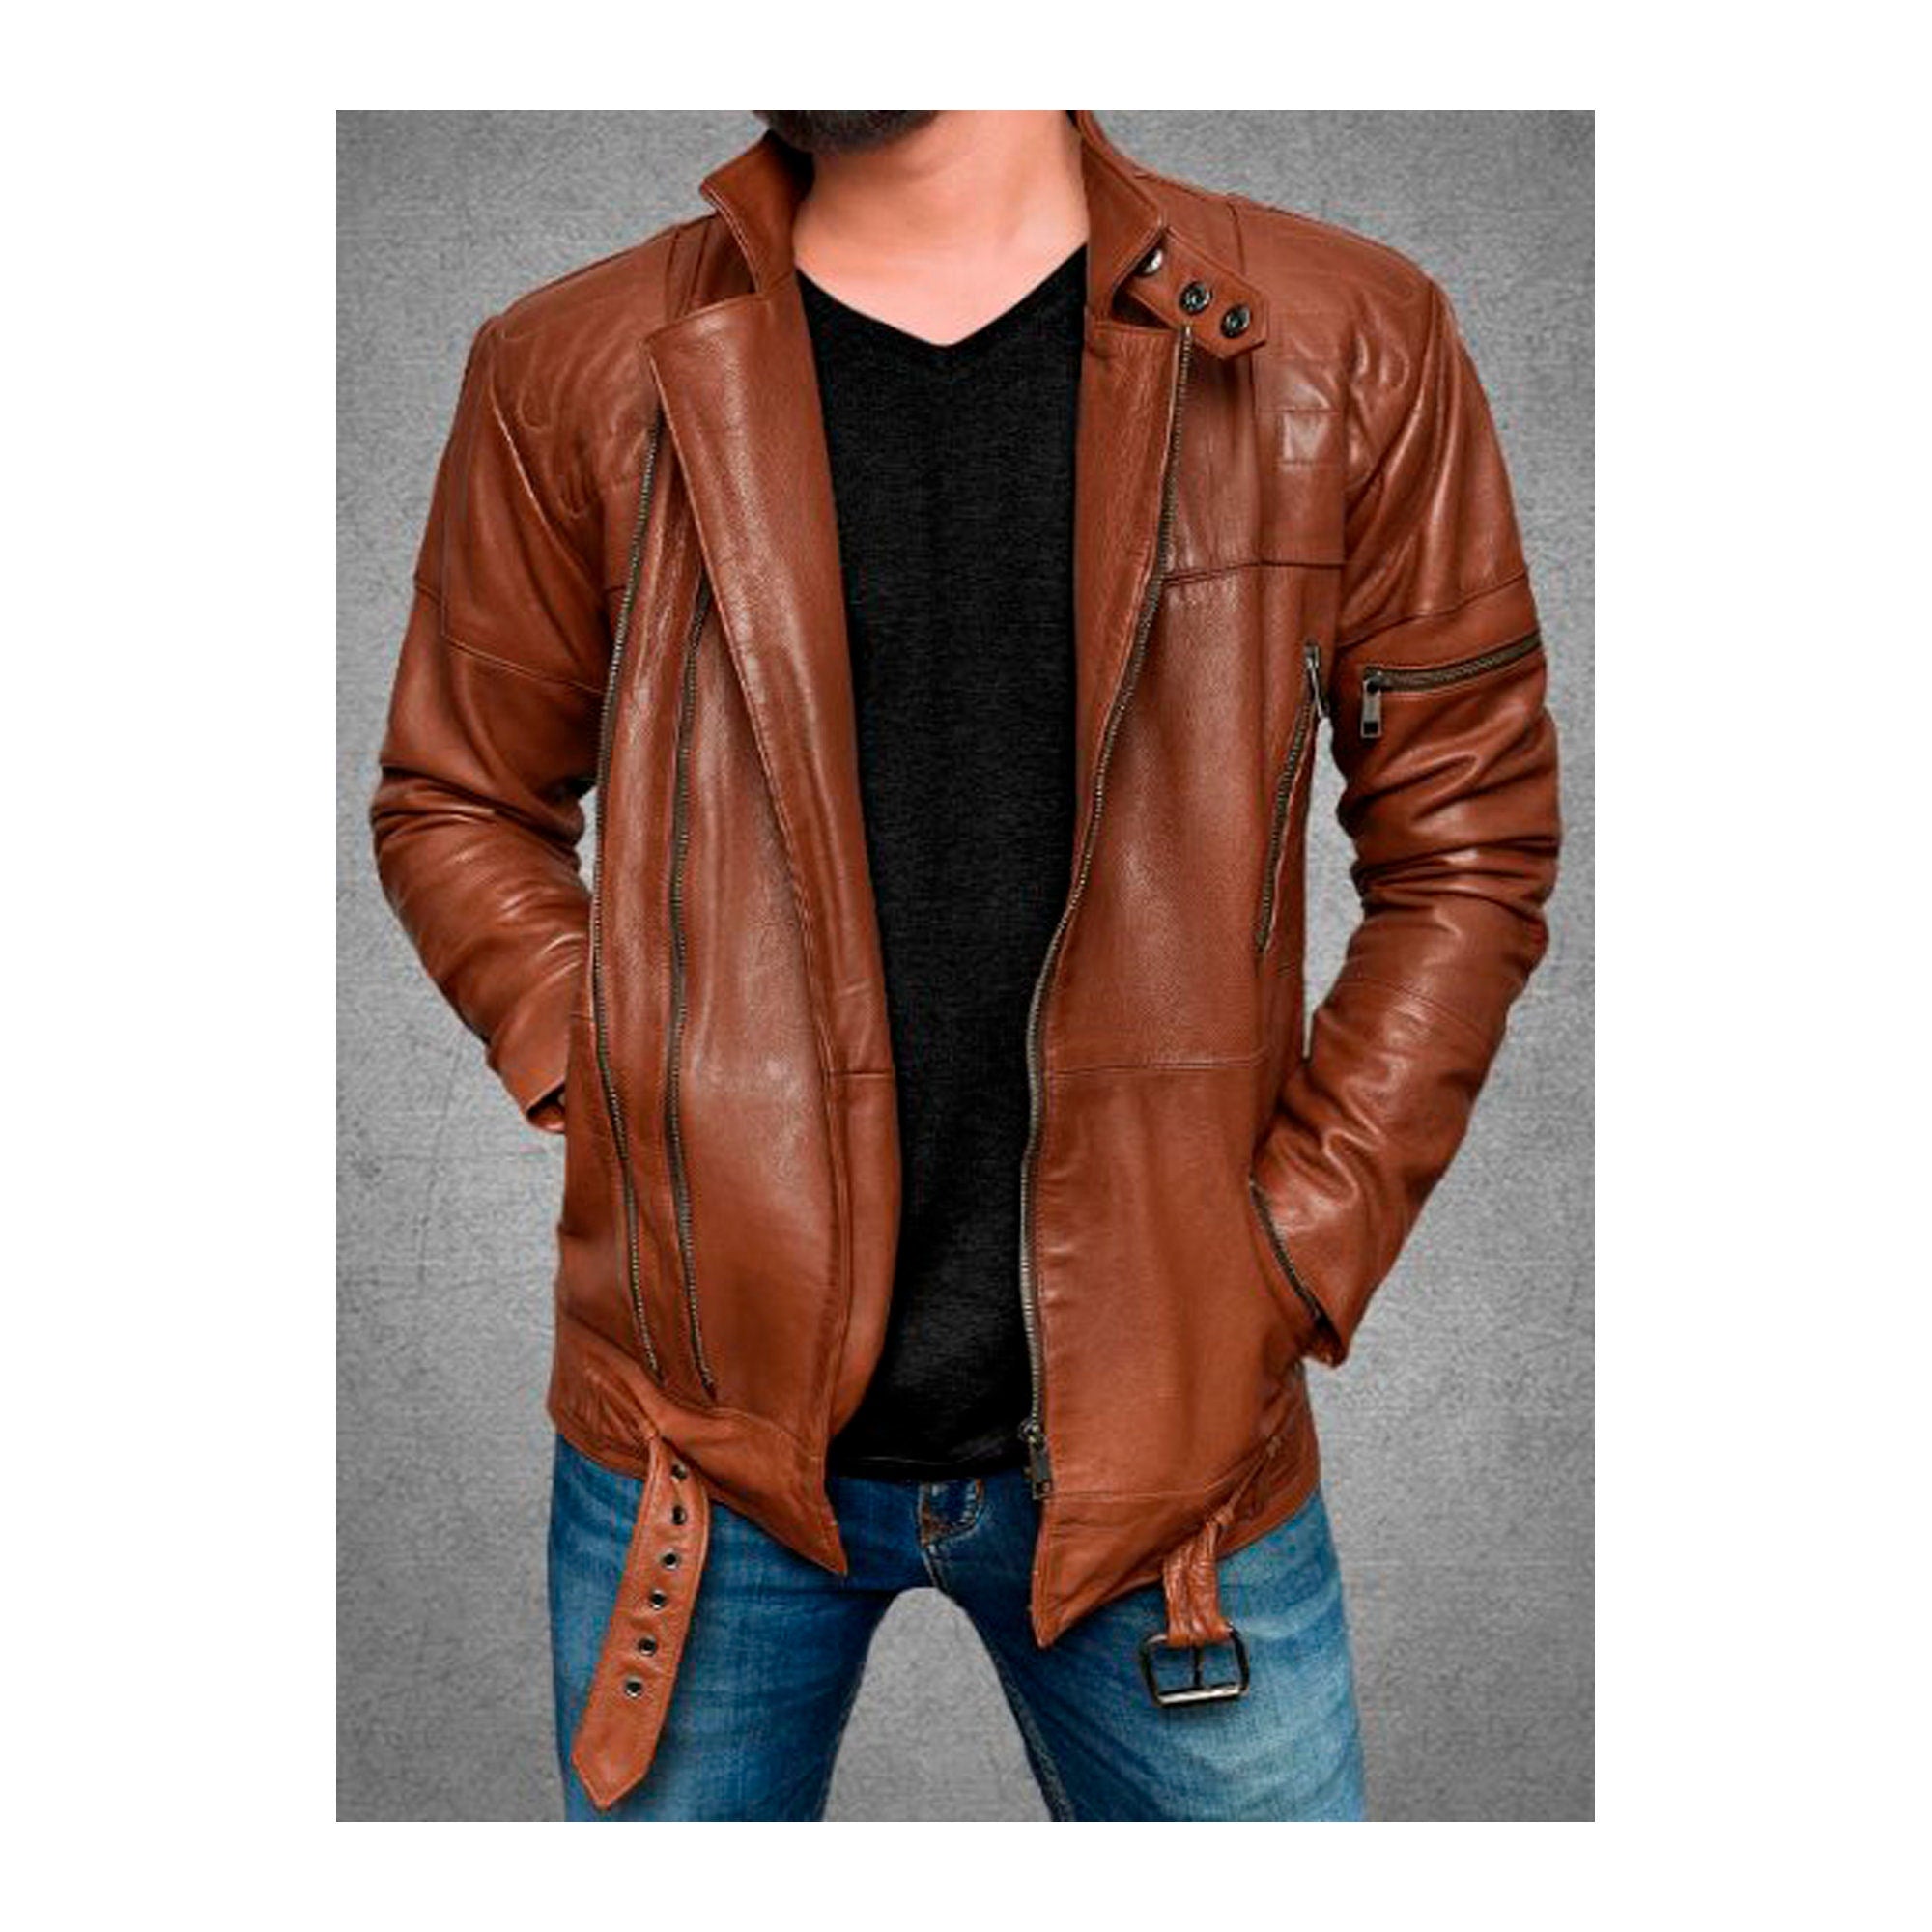 Blingsoul Leather Jackets For Men - Real Lambskin Colombia | Ubuy